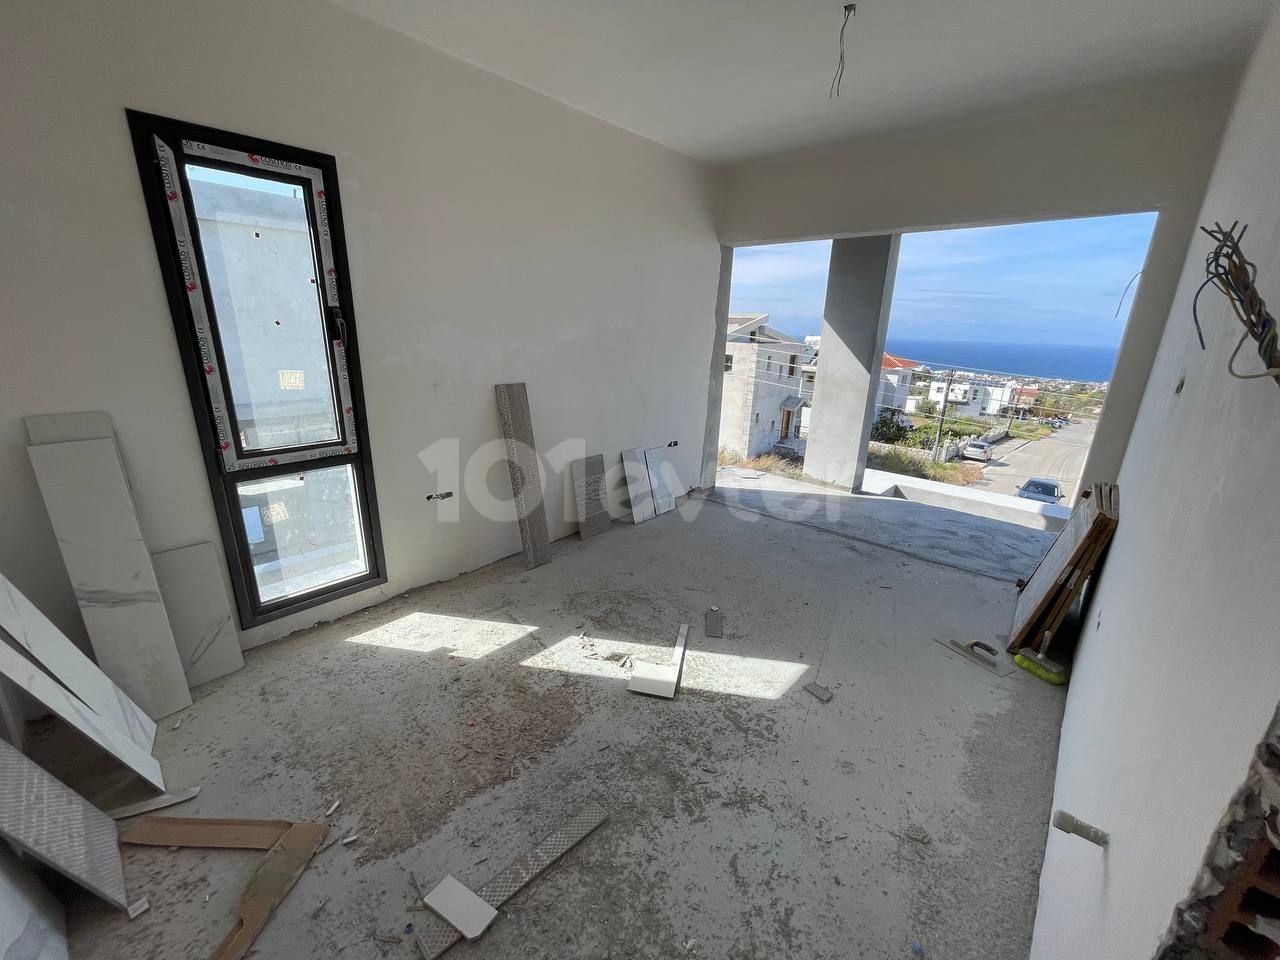 4-bedroom semi-detached villas with sea view and private pool for sale in Çatalköy